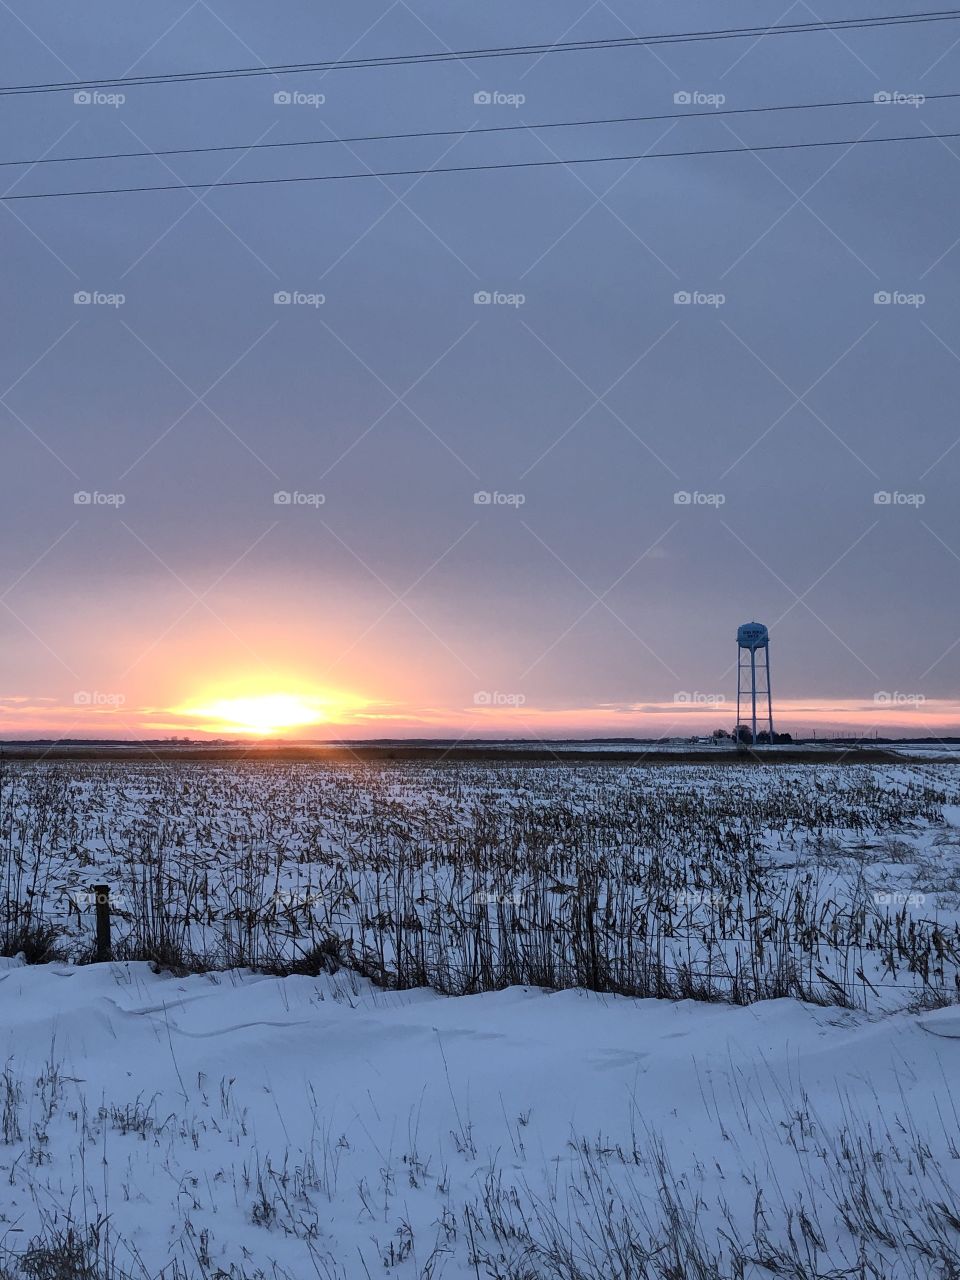 Sunset over the snow covered cornfield water tower standing in the background 